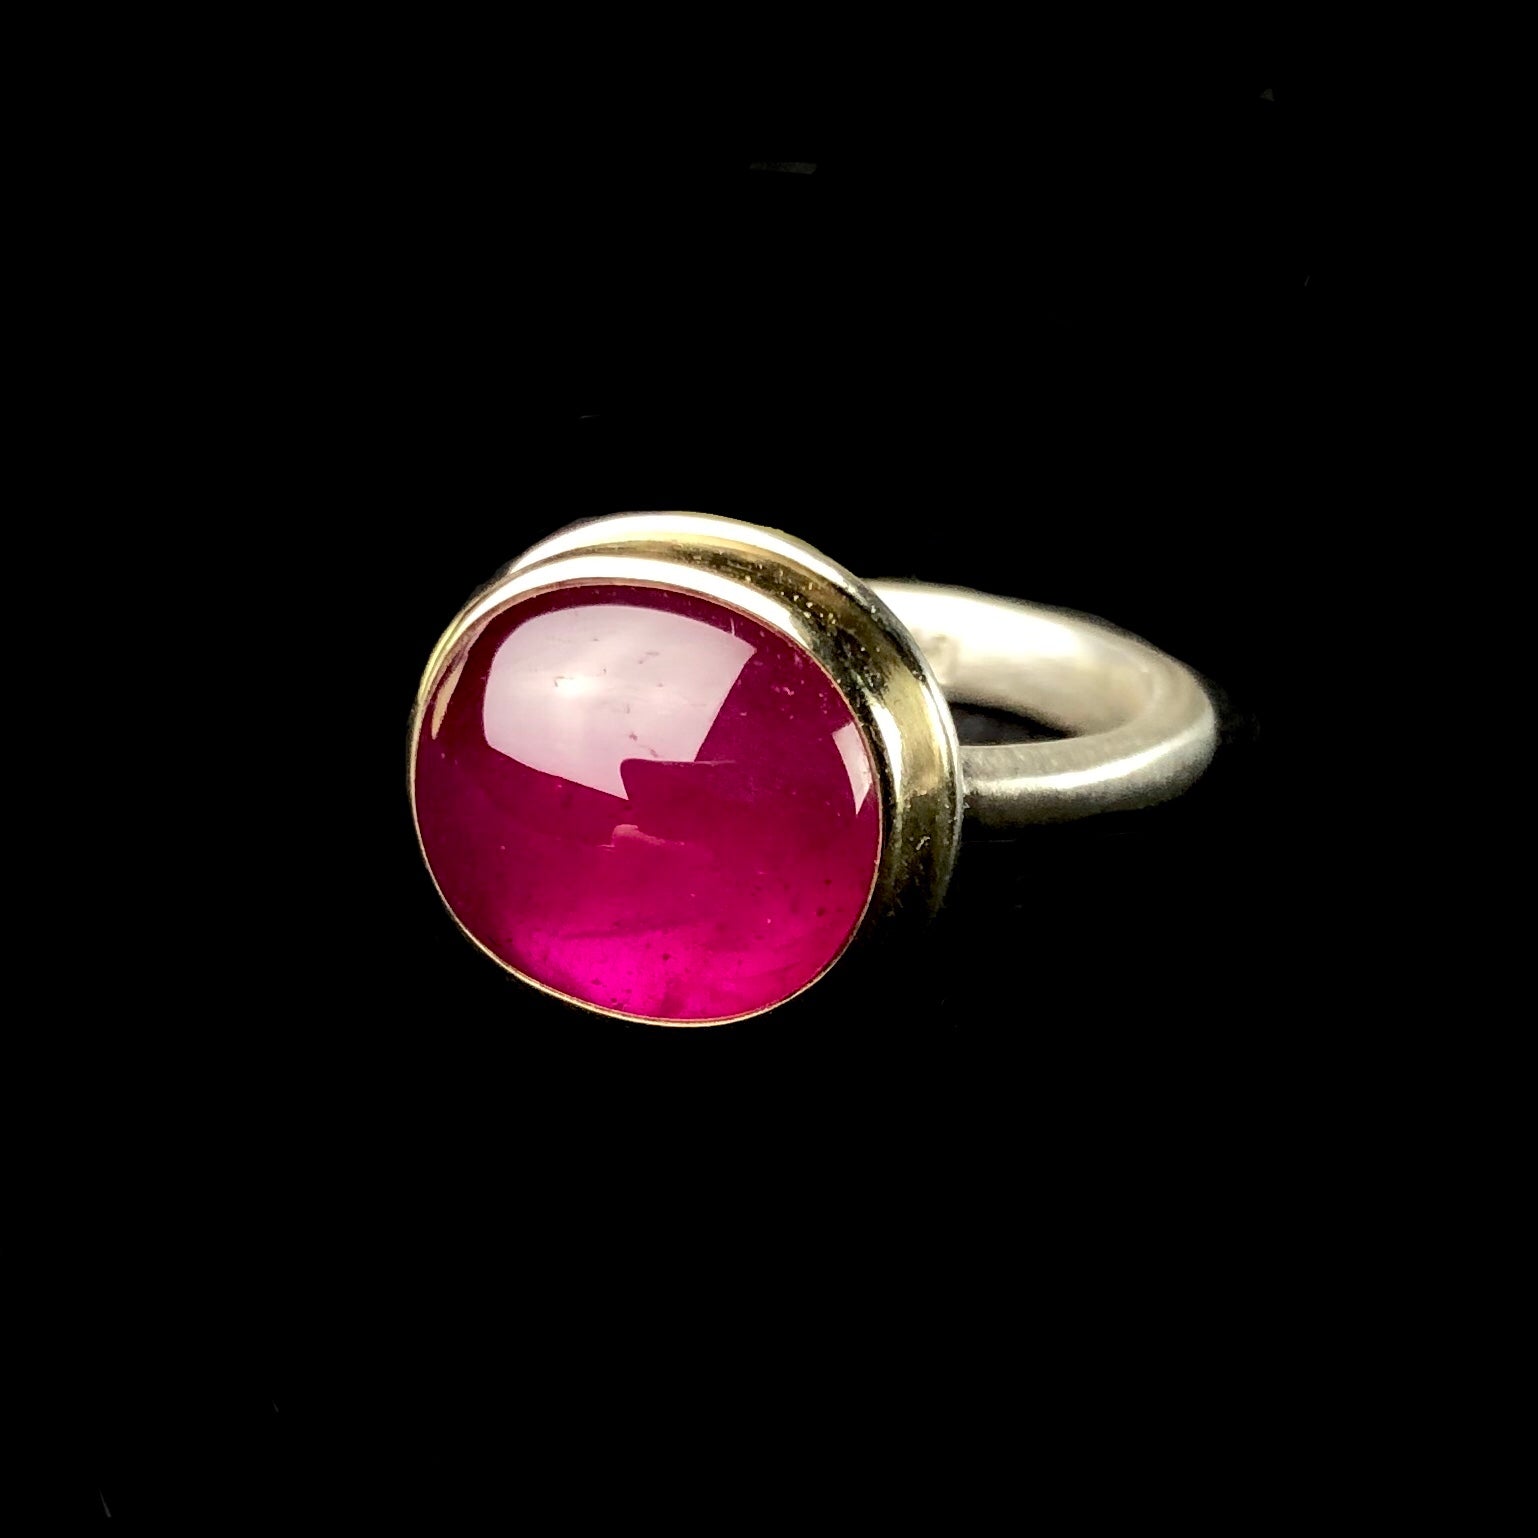 Oval shaped, vibrant pink ruby stone ring